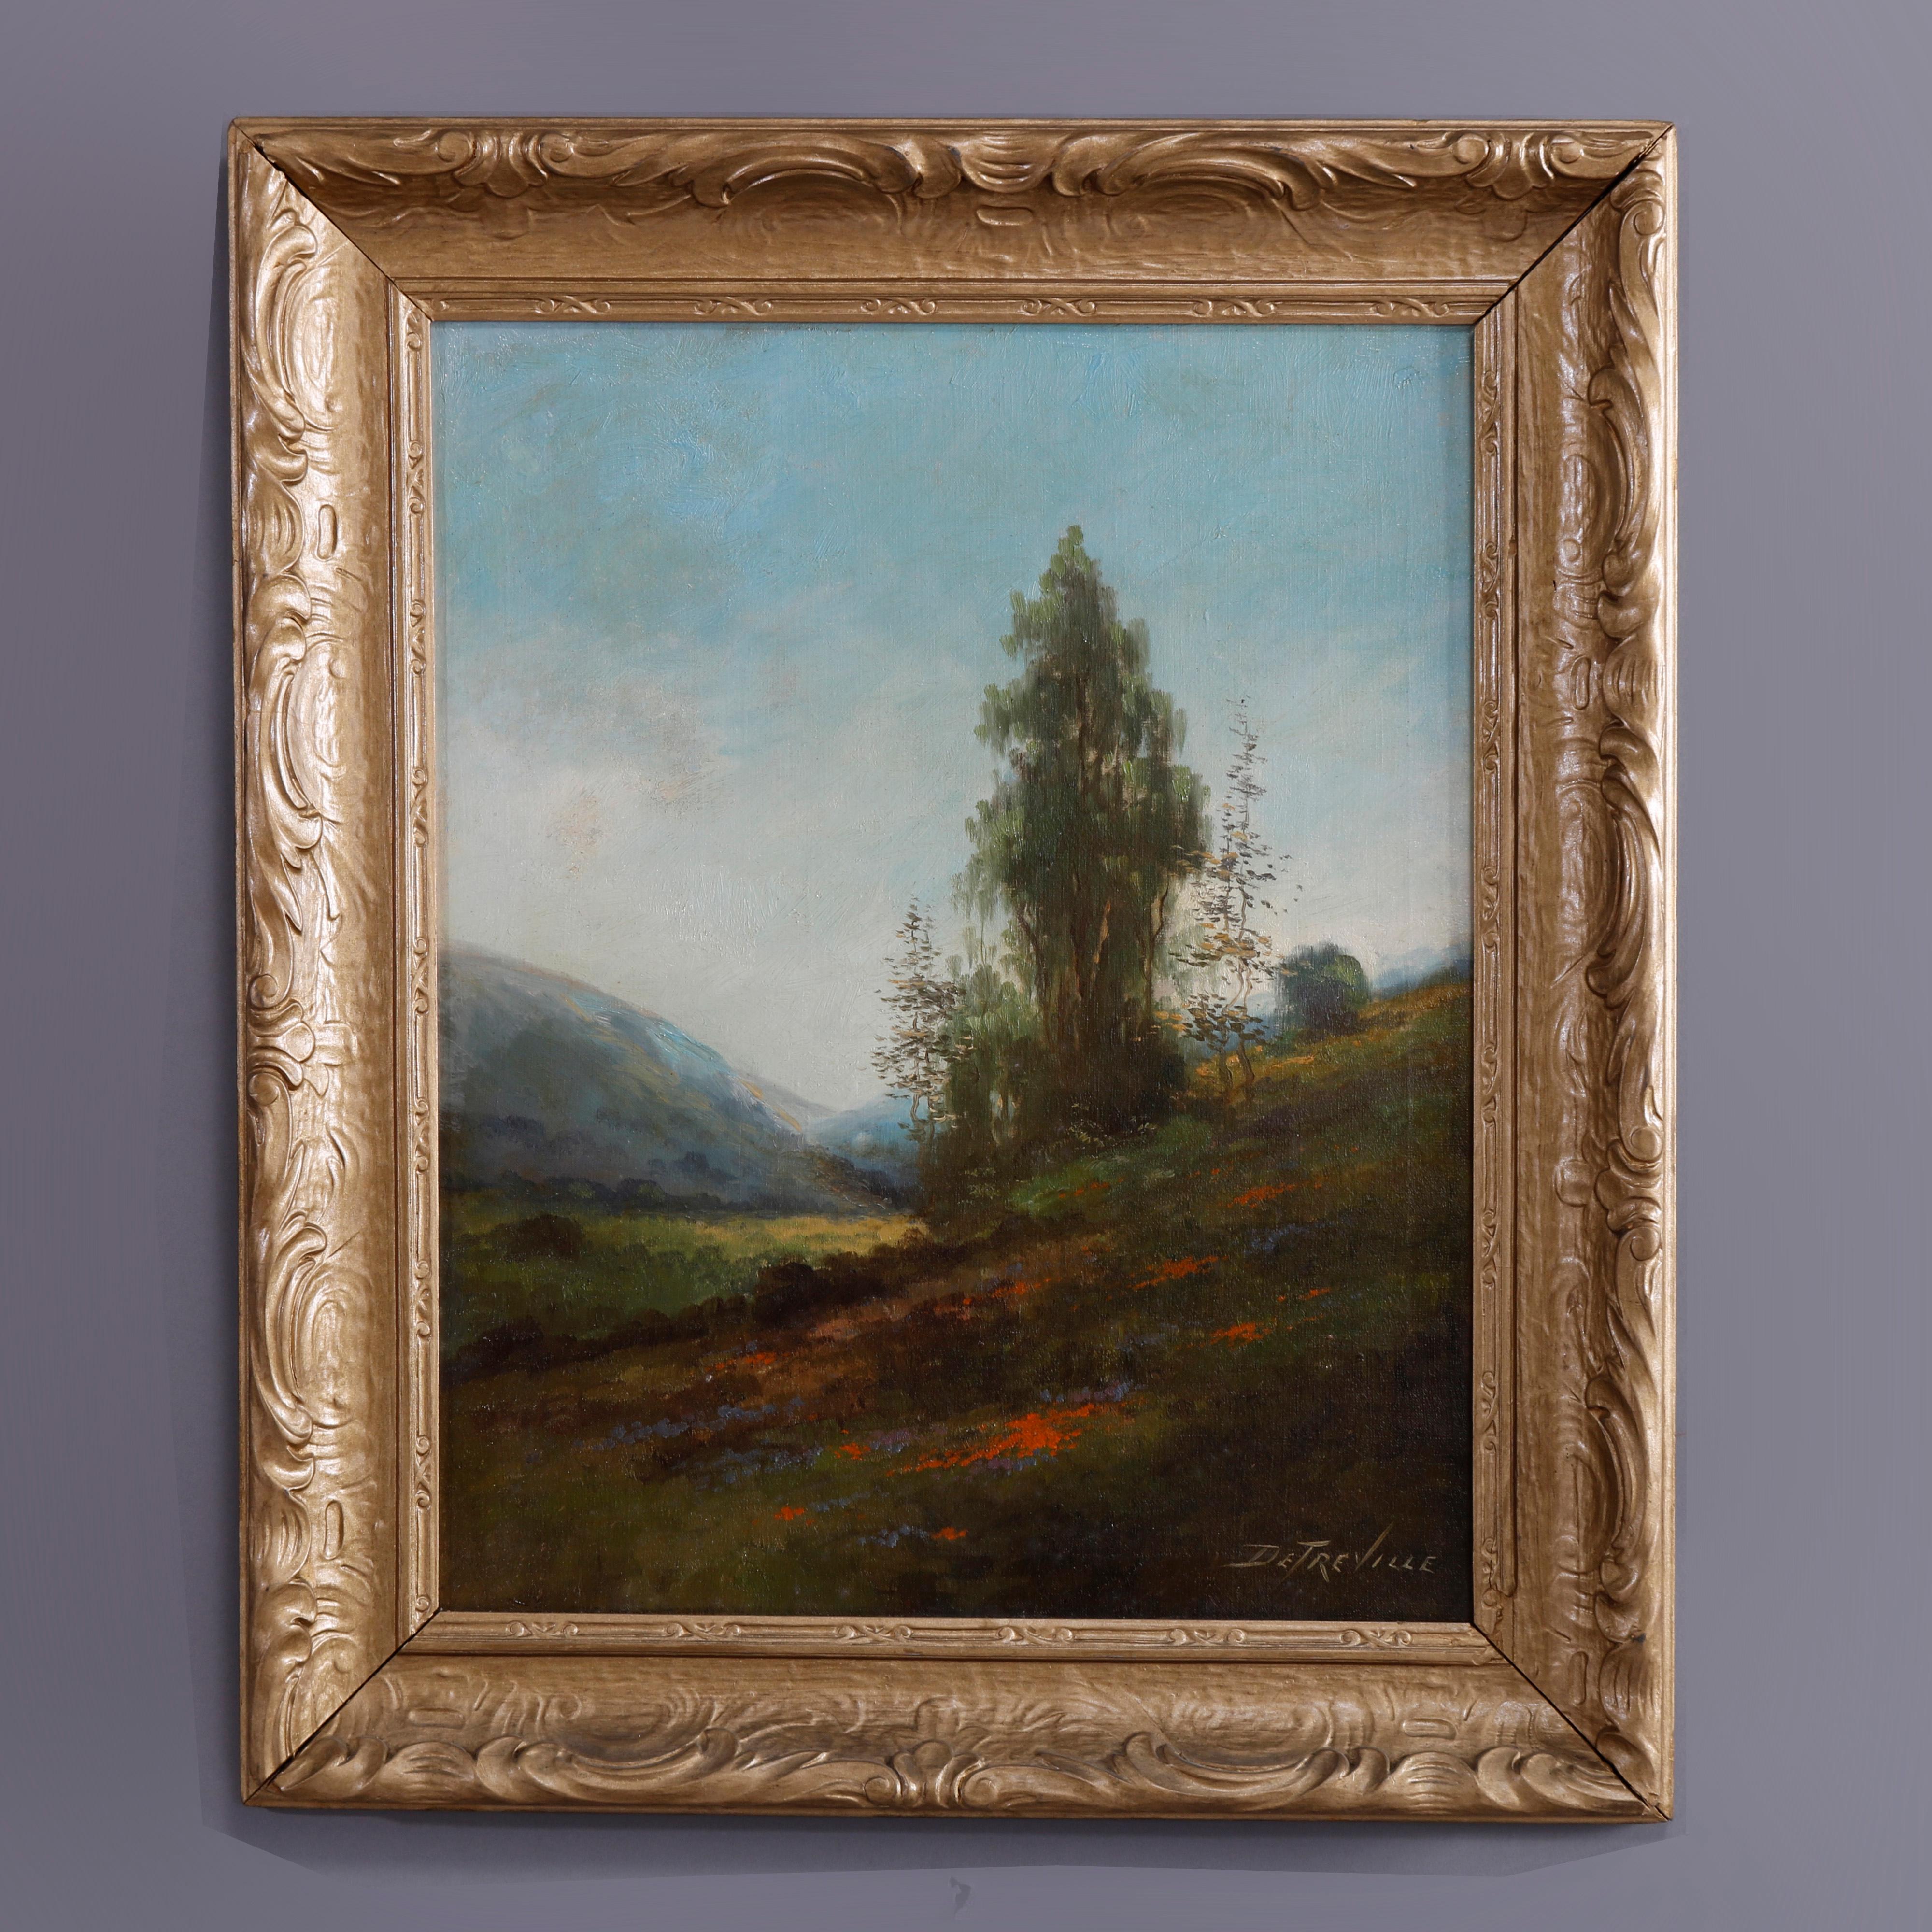 An antique landscape painting by Richard Dtreville offers oil on canvas meadow and mountain scene, artist signed lower right, seated in giltwood frame, c1910

Measures - 25.5''H x 21.5''W x 1.75''D; sight 16.25'' x 20.25''.

Catalogue Note: Ask